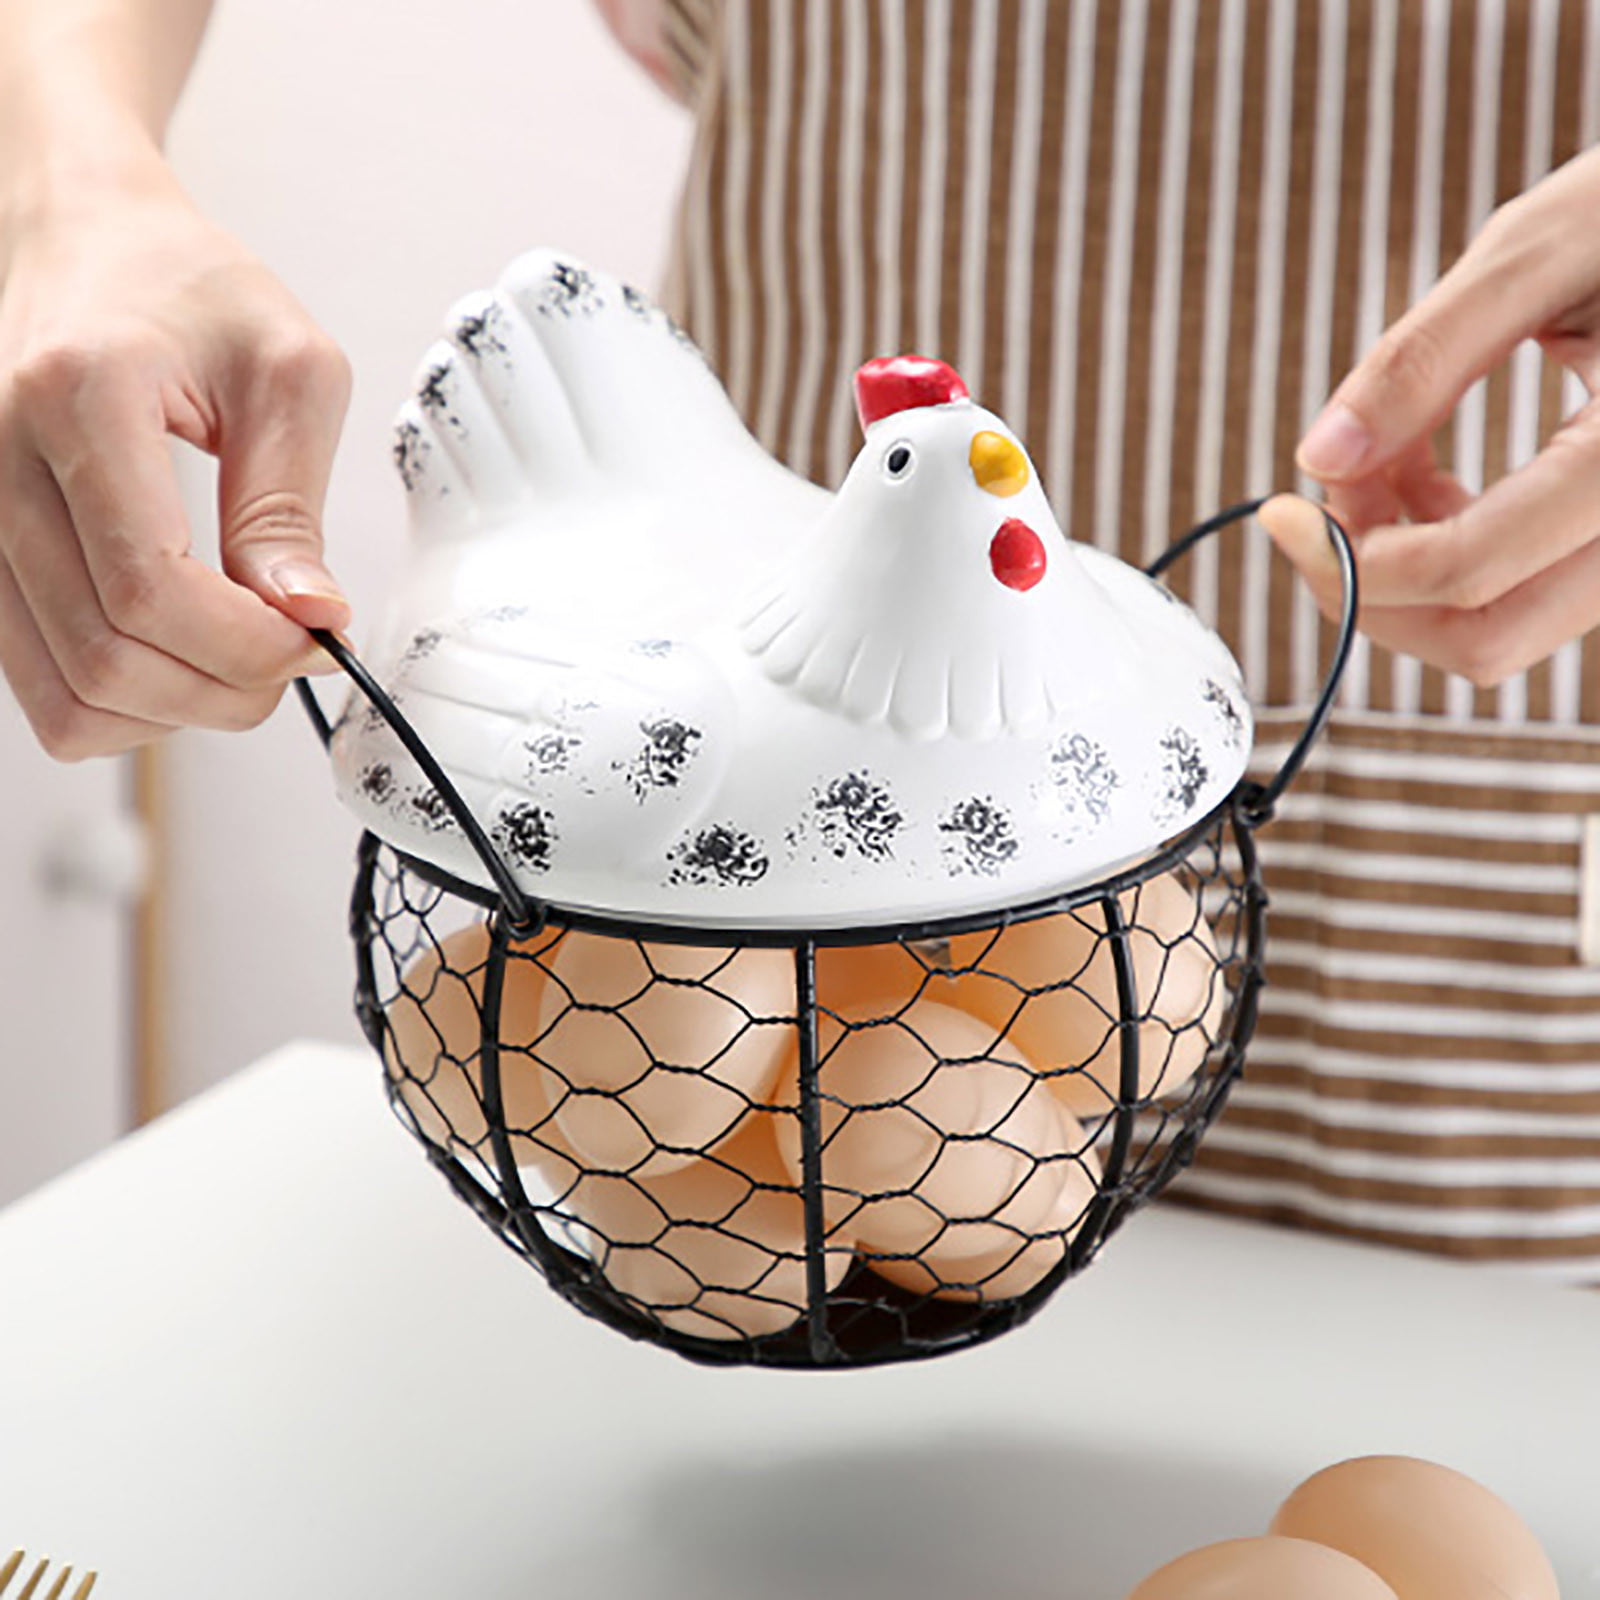  Chicken Egg Basket For Collecting Eggs,Wire Egg Basket For  Gathering Fresh Eggs,Cream Egg Baskets For Fresh Egg Farmhouse,Handle  Vintage Metal Egg Basket For Countertop Gift Kitchen Storage